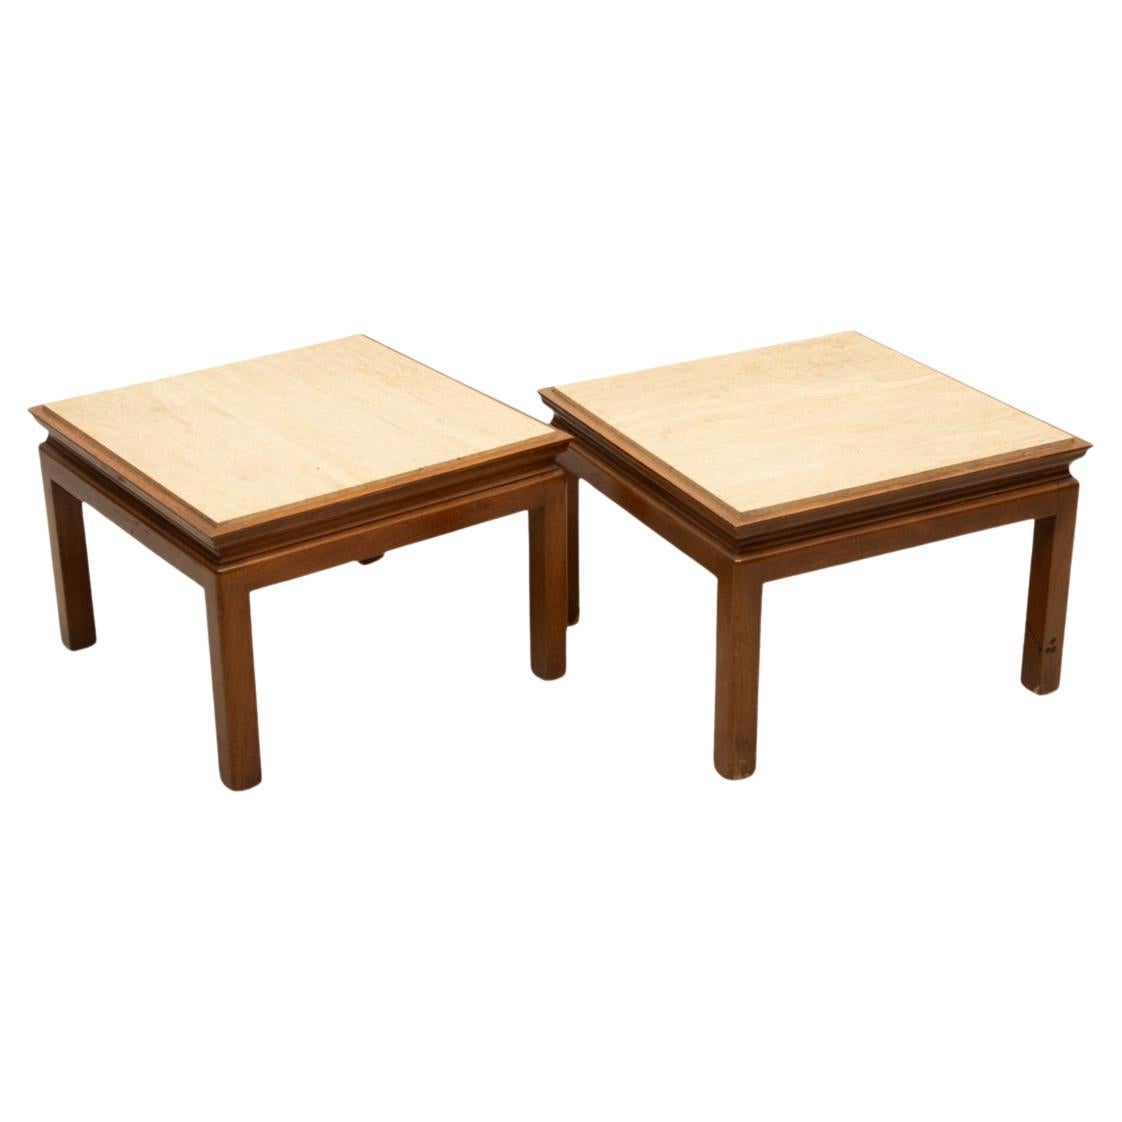 Pair of Mid Century Modern End Tables by Widdicomb Furniture Co Grand Rapids, MI. Travertine tops with carved wood lower table structure. Widdicomb labels on the underside of tables. Can be used as lamp tables end tables or nightstands. Located in